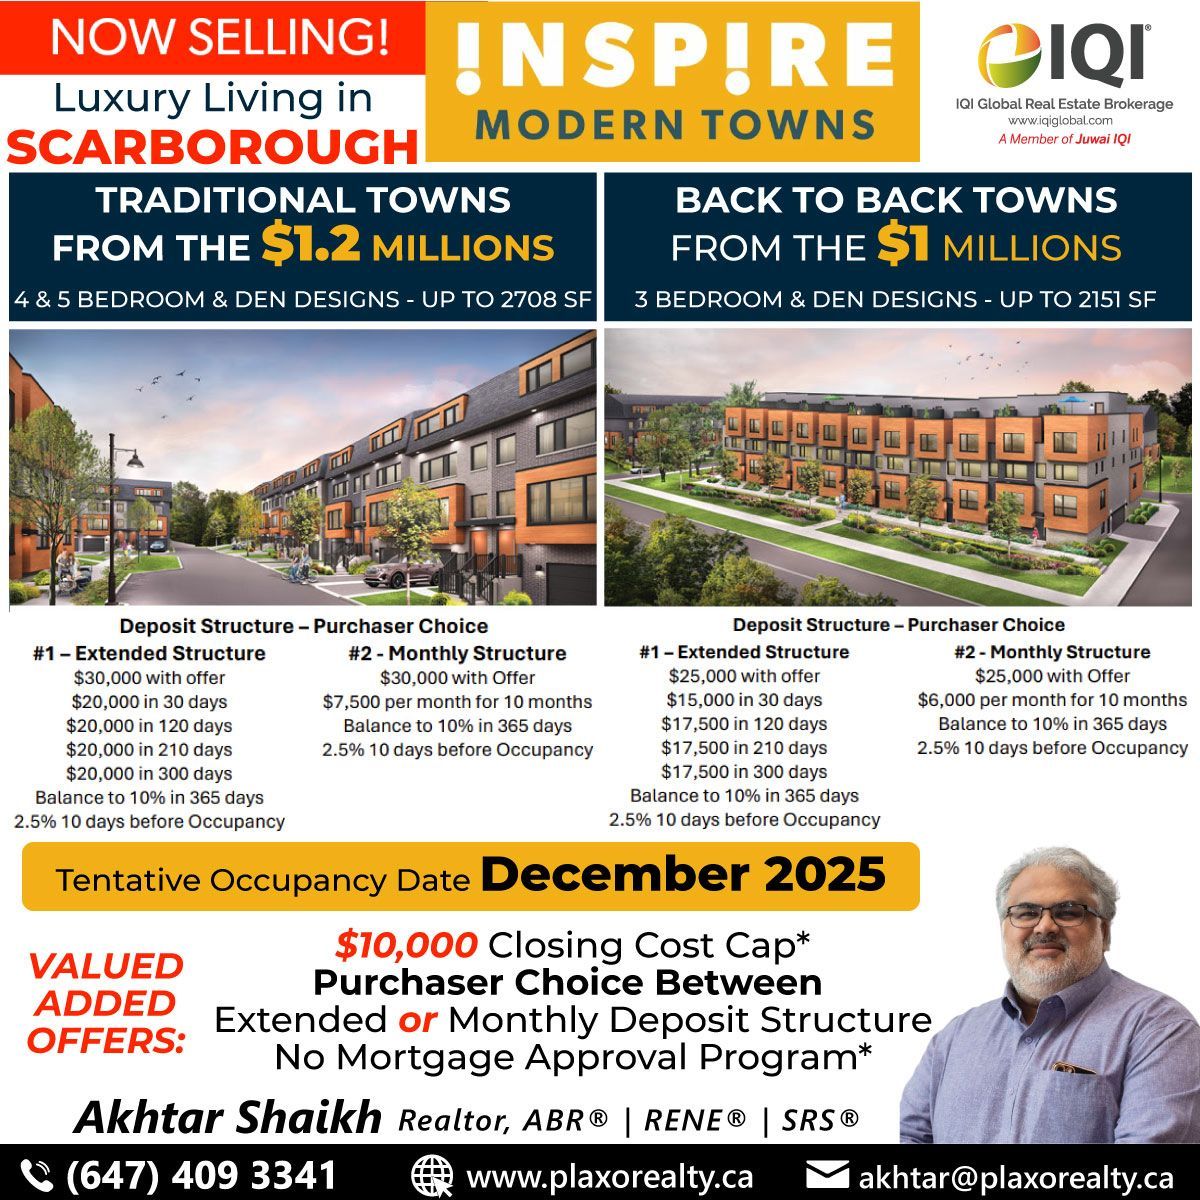 ✨ Inspire Towns✨ - Luxury Living in Scarborough!
.
♦️ Back to Back Town from $1M
♦️ Traditional Town from $1.2M
.
#akhtariqi #akhtarshaikh #firsttimehomebuyer #newhomeowner 
#InspireTowns #Townhome #Scarborough #UrbanLuxury #TownhomeLiving #scarboroughrealestate